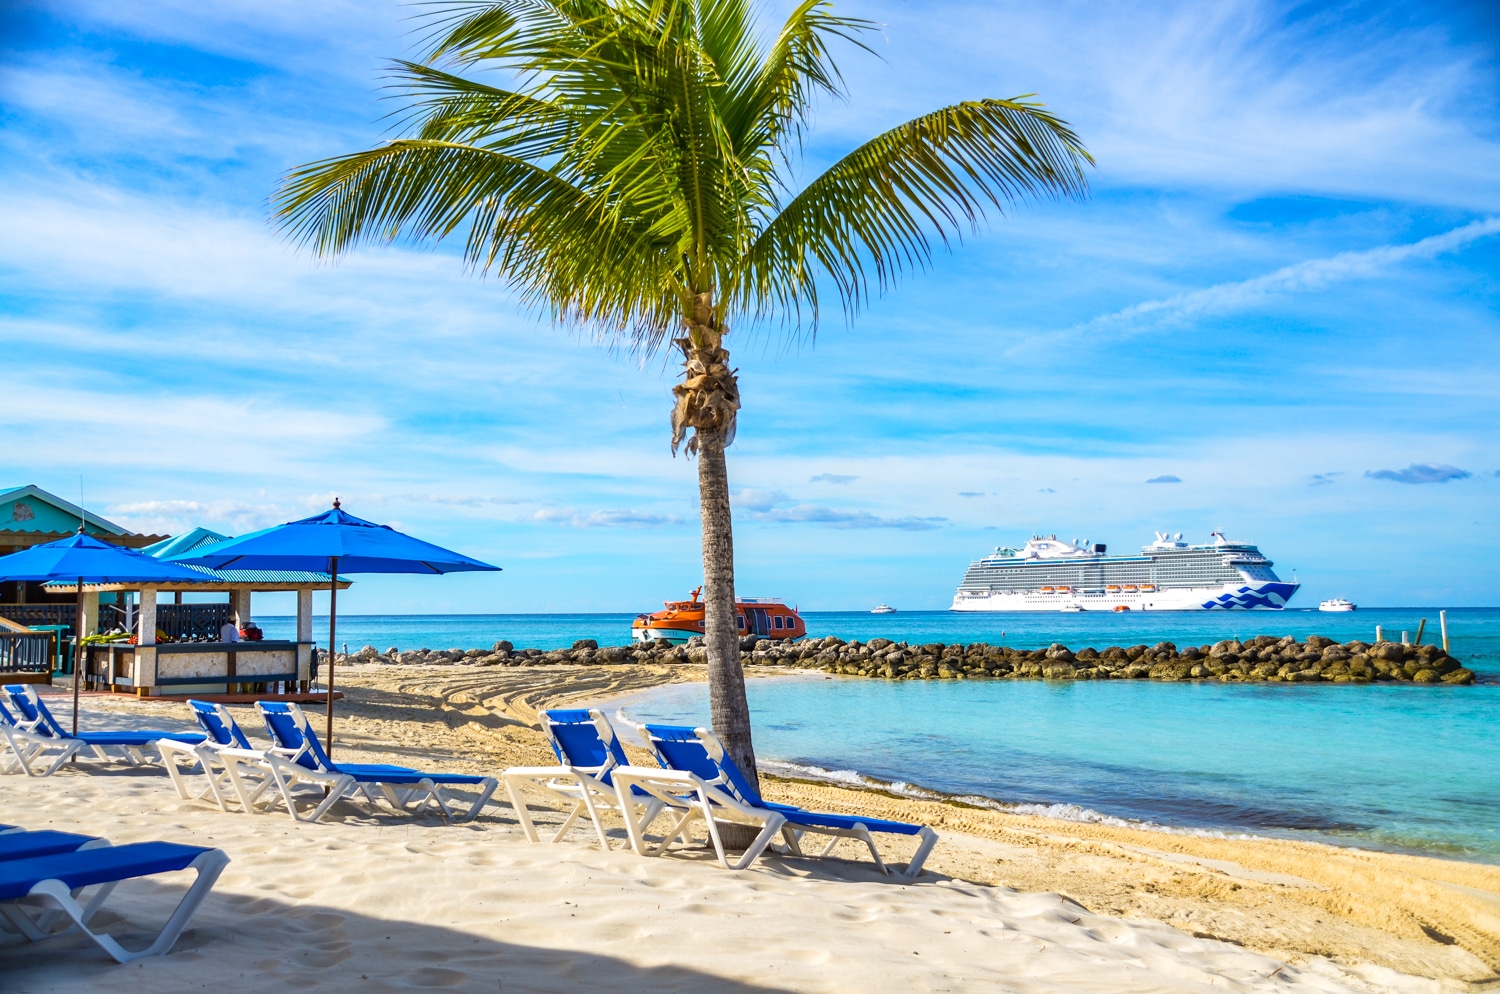 Sky Princess at Princess Cays, private island in the Caribbean. Lounge chairs on the beach with palm tree.